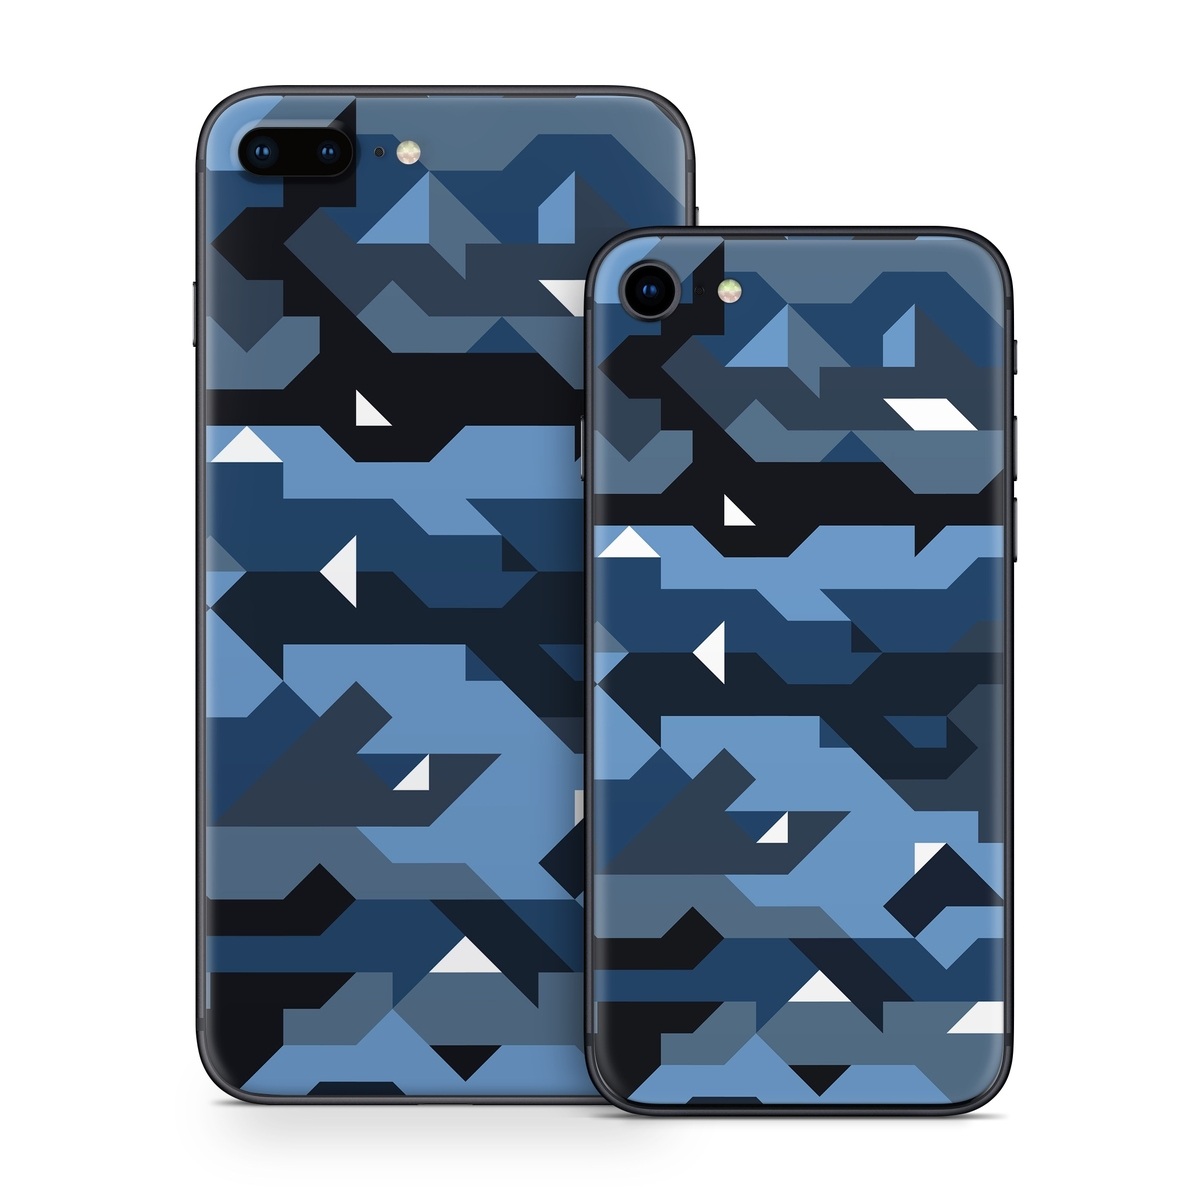 iPhone 8 Series Skin design of Blue, Pattern, Design, Font, Line, Camouflage, Illustration, Triangle, with blue, black, white, gray colors